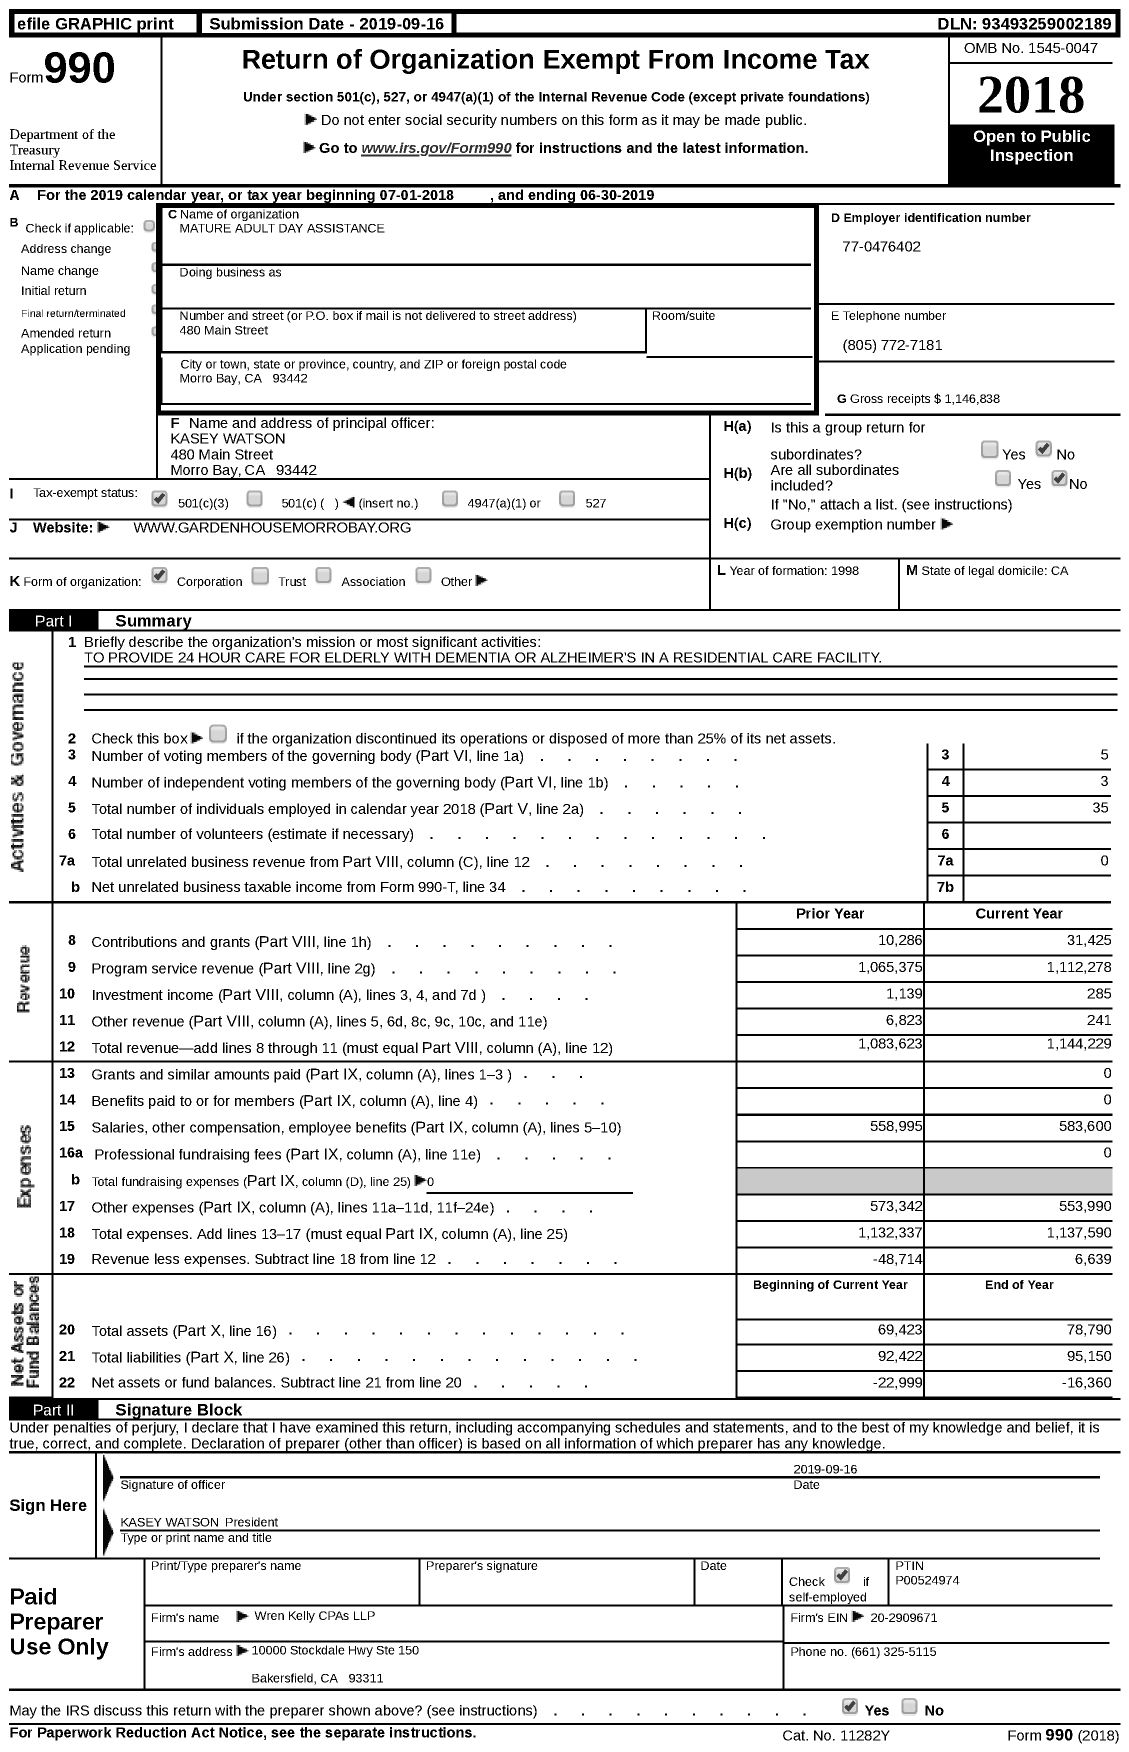 Image of first page of 2018 Form 990 for Mature Adult Day Assistance